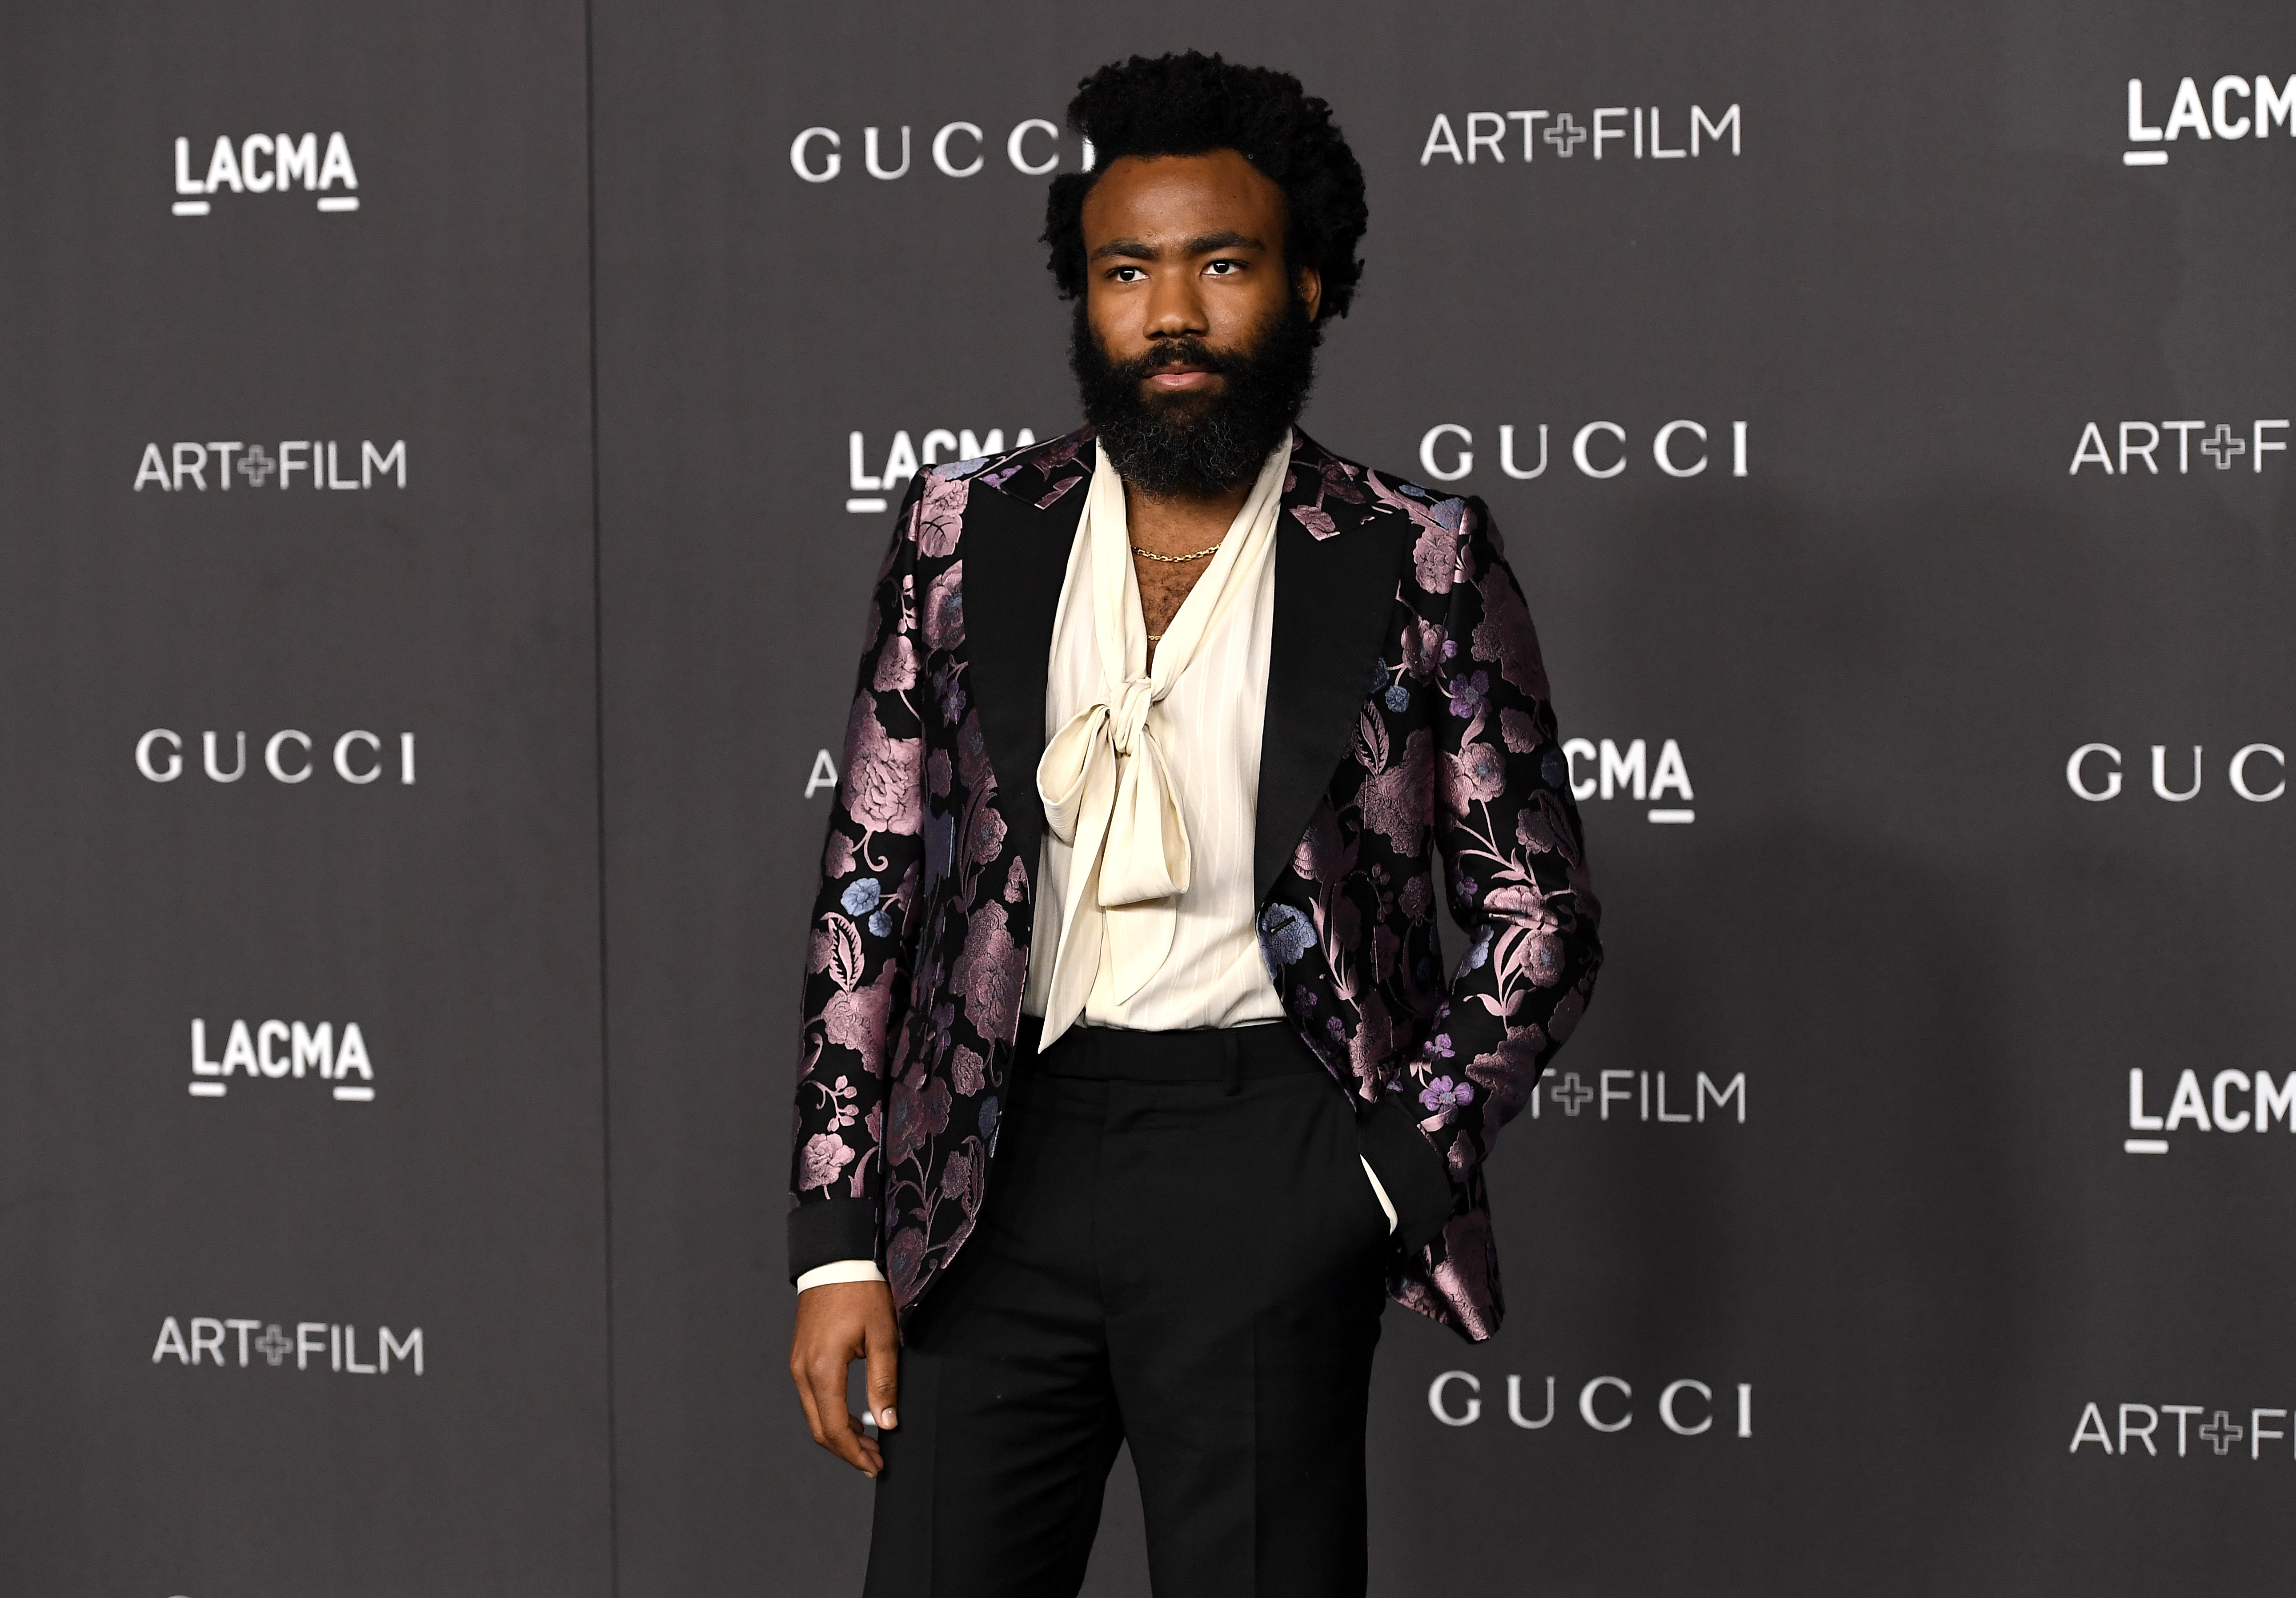 Donald Glover Drops Surprise New Music with Ariana Grande, SZA & 21 Savage  - 99.7 NOW